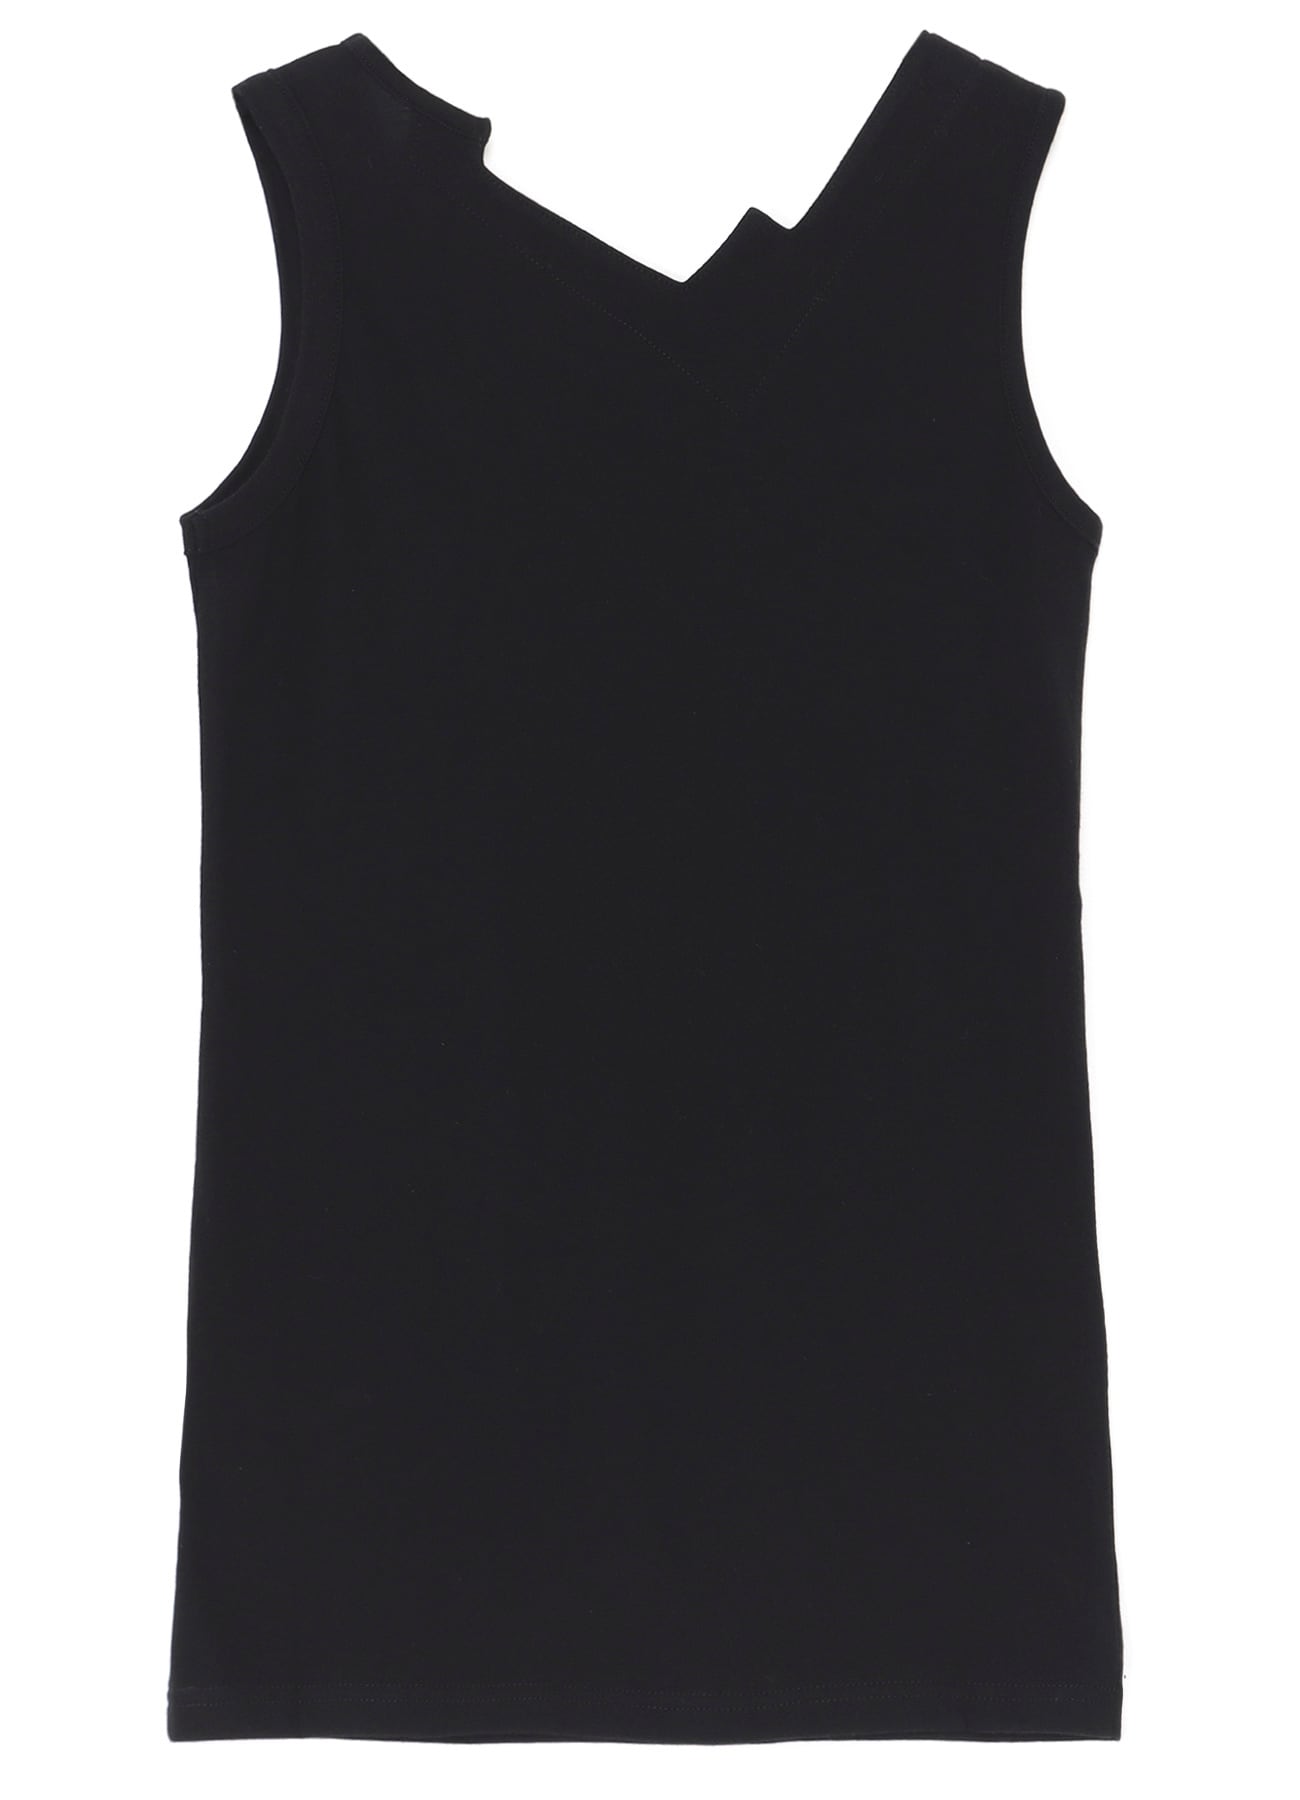 LOW TENSION SINGLE JERSEY collections ZIGZAG TANK TOP(S Black 